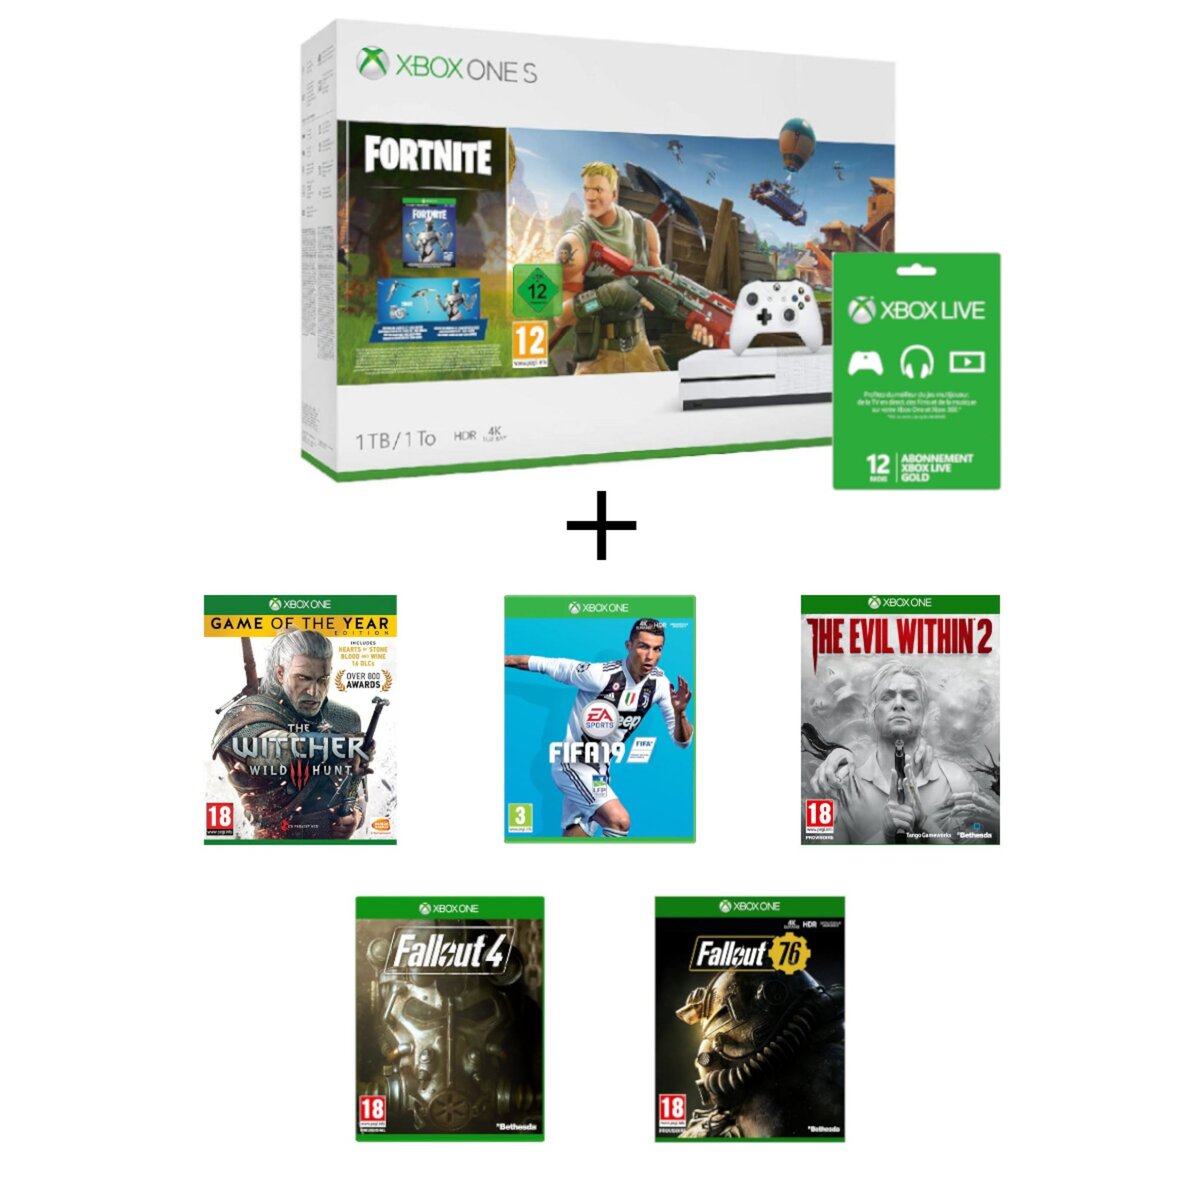 Console Xbox One S Fortnite + FIFA 19 + Fallout 76 + Fallout 4 + The Witcher 3 + The Evil Within 2 + Abonnement Live 1 an